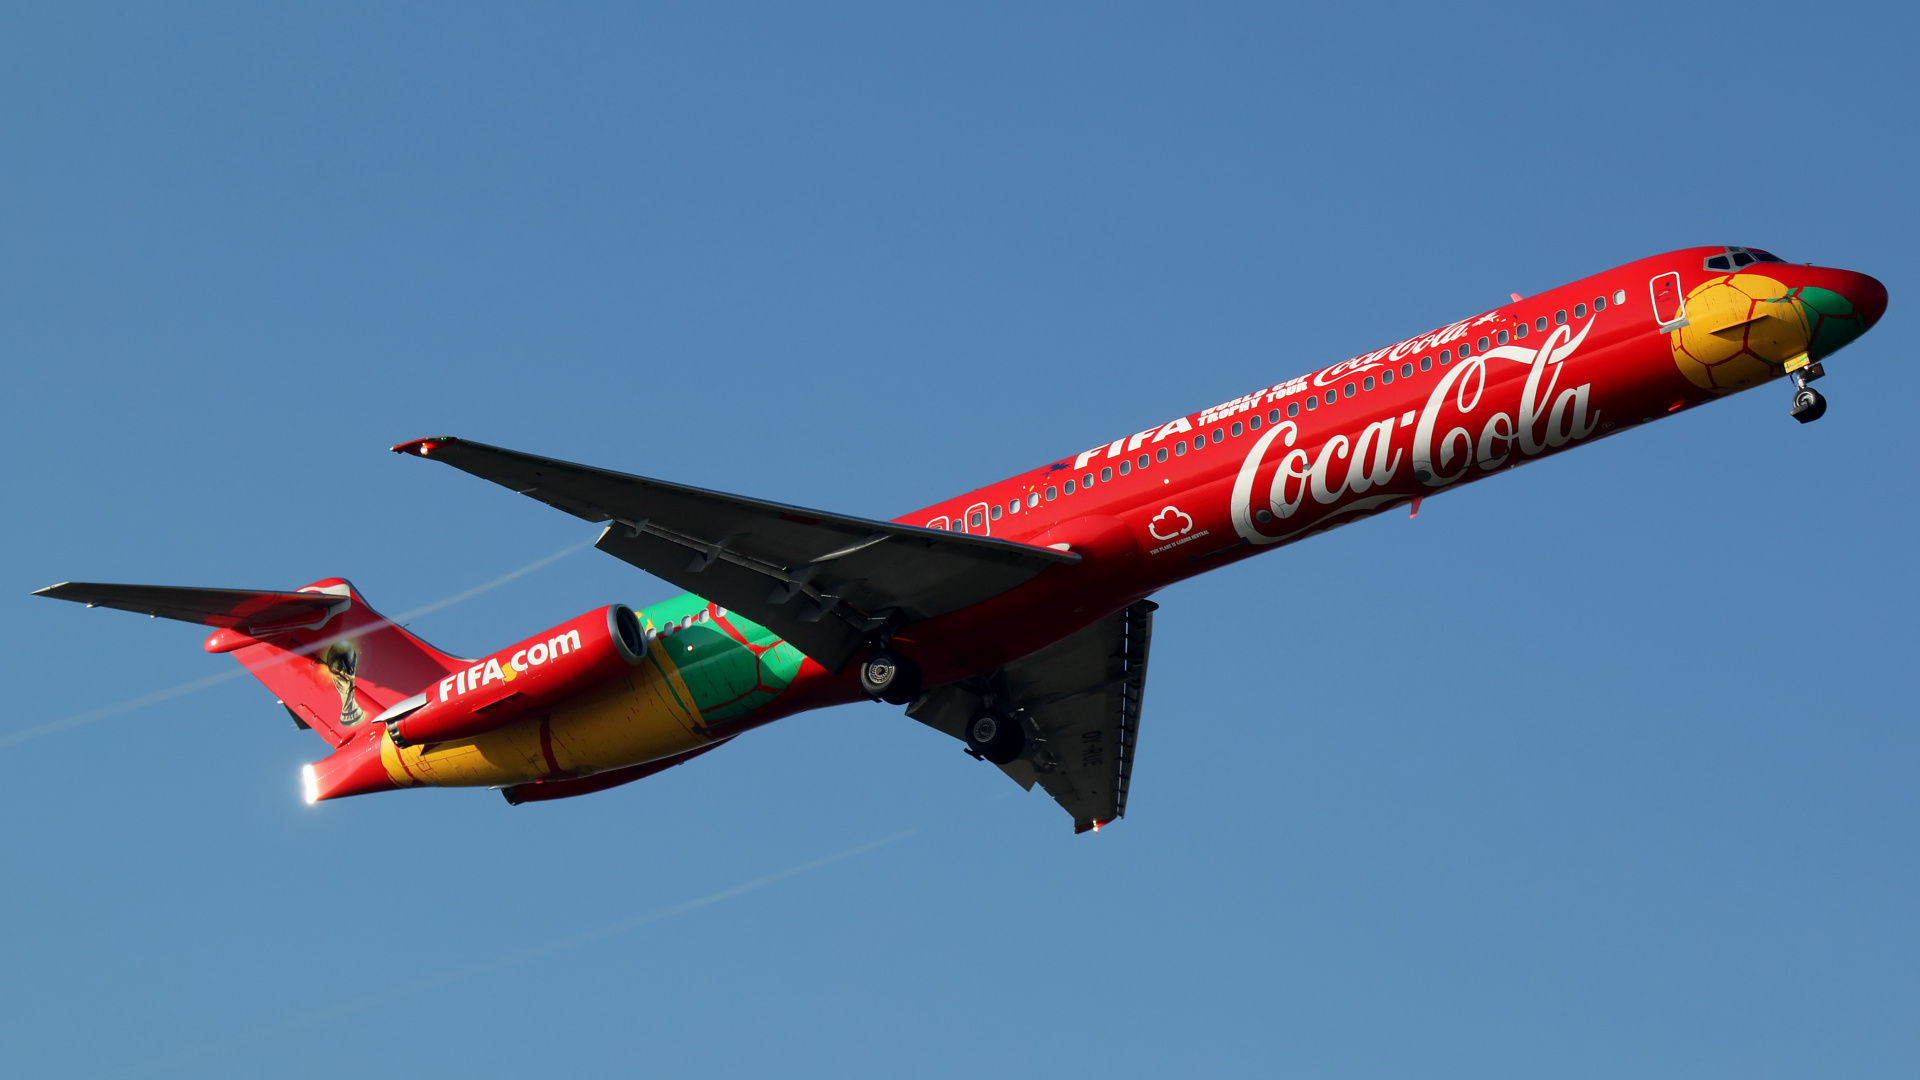 OY-RUE, DAT - Danish Air Transport (FIFA World Cup Trophy Tour livery) (Aircraft » EPWA Spotting » McDonnell Douglas MD-83)